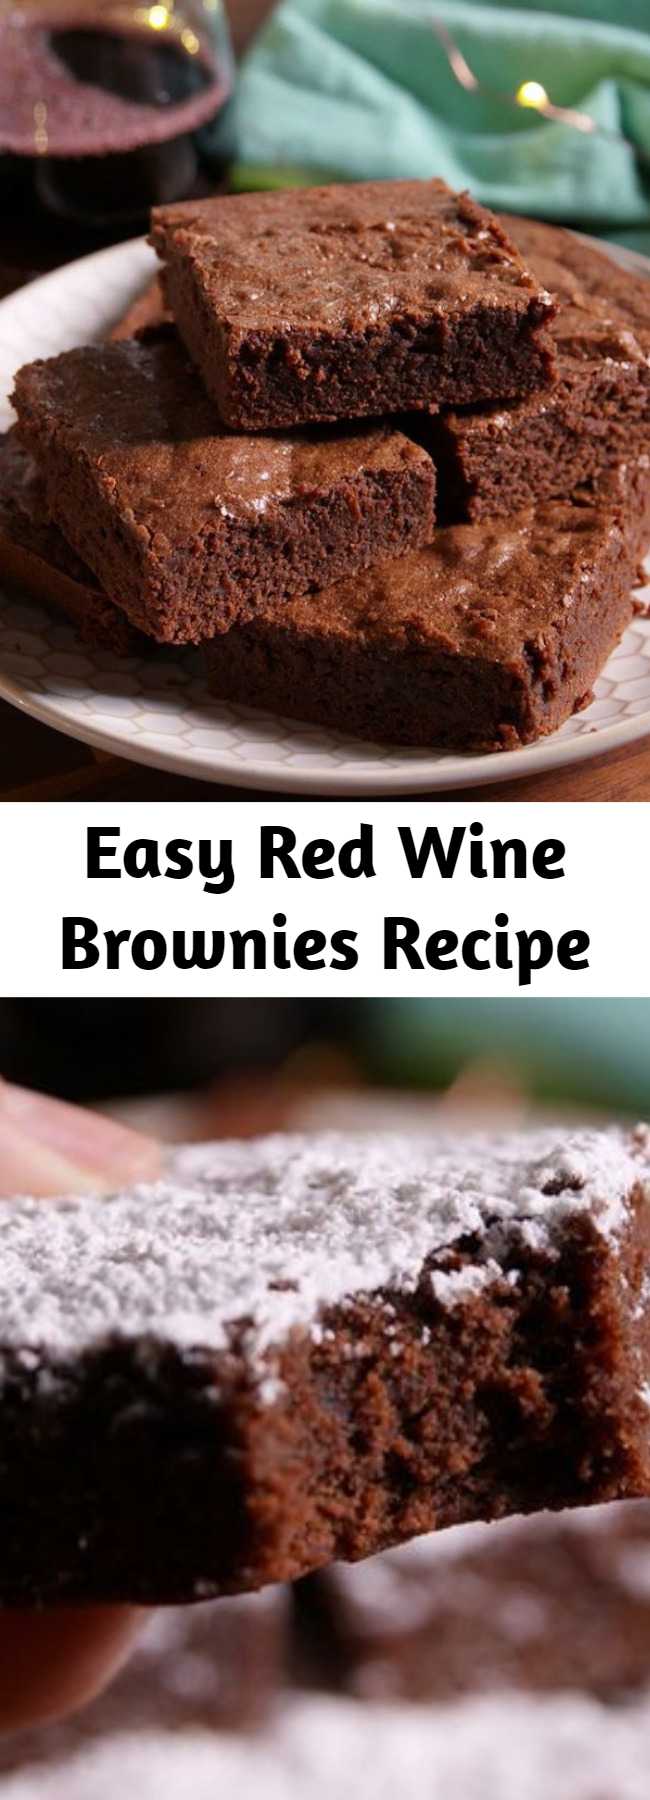 Easy Red Wine Brownies Recipe - Taking wine-and-chocolate night to a whole new fudgy level.